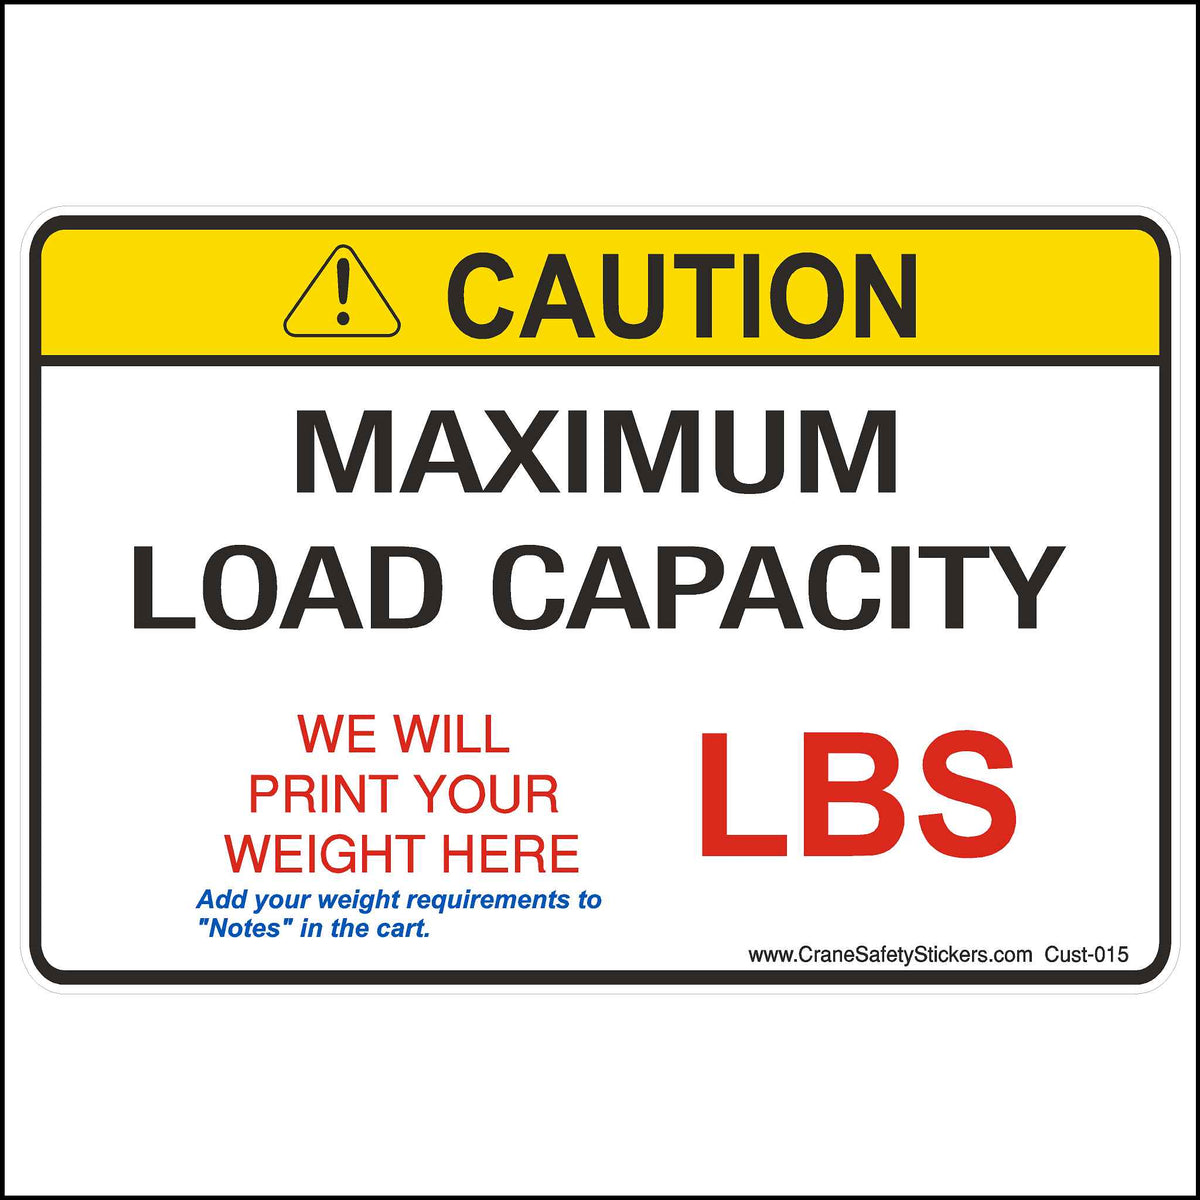 Custom Maximum Load Capacity Sign We Print With Your Weight Requirements